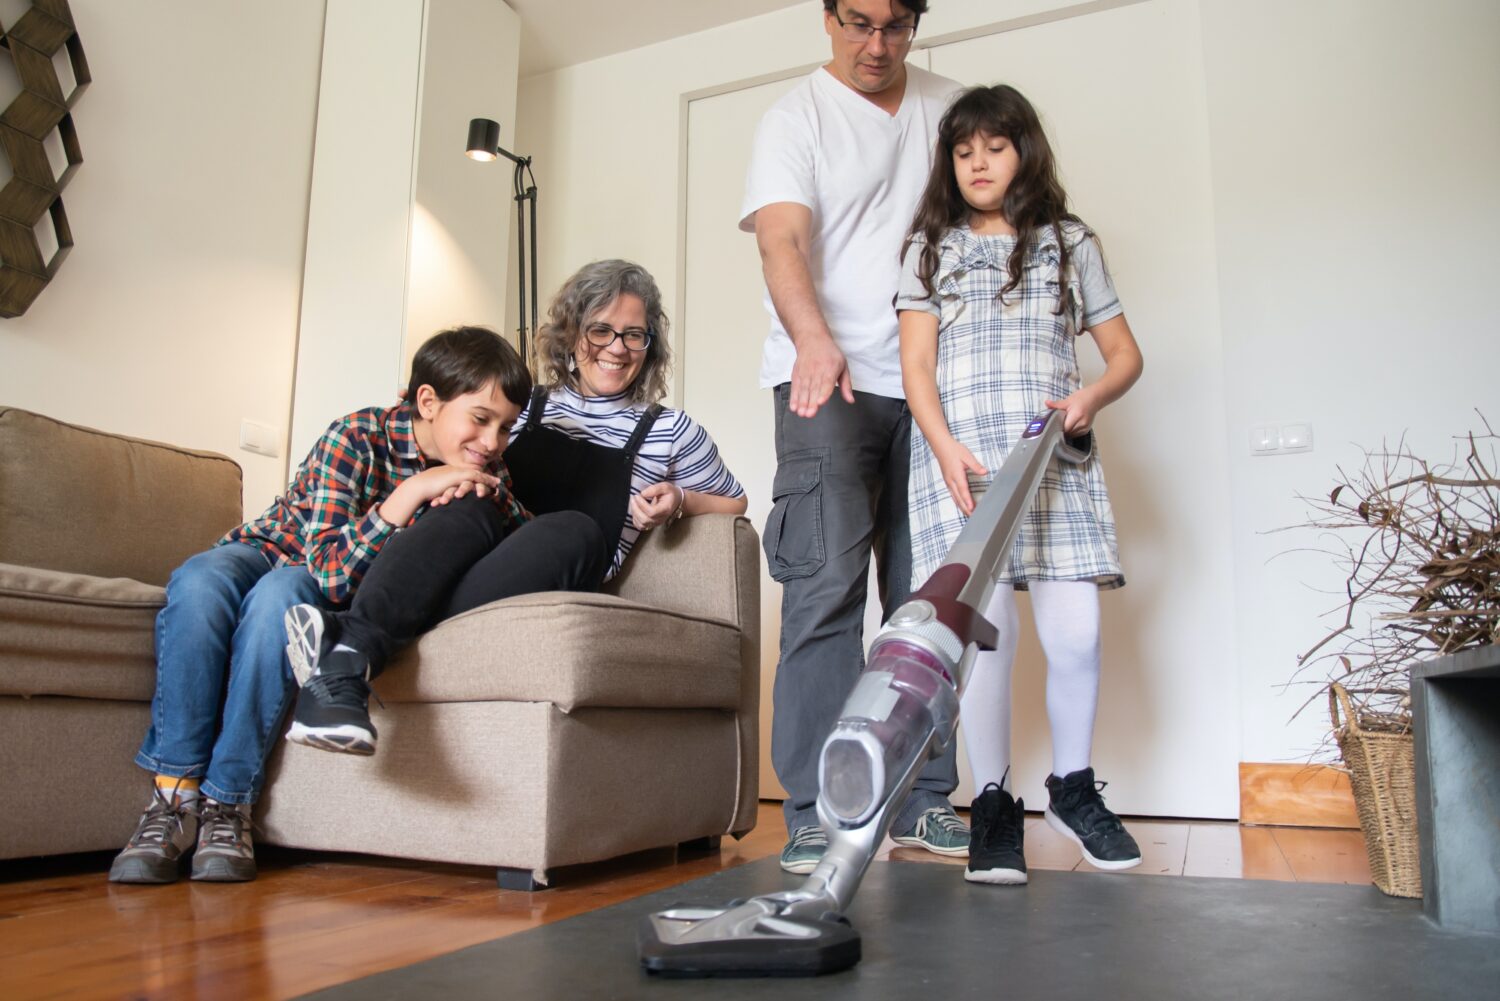 A young girl practices using a bagless vacuum cleaner while her family looks on.